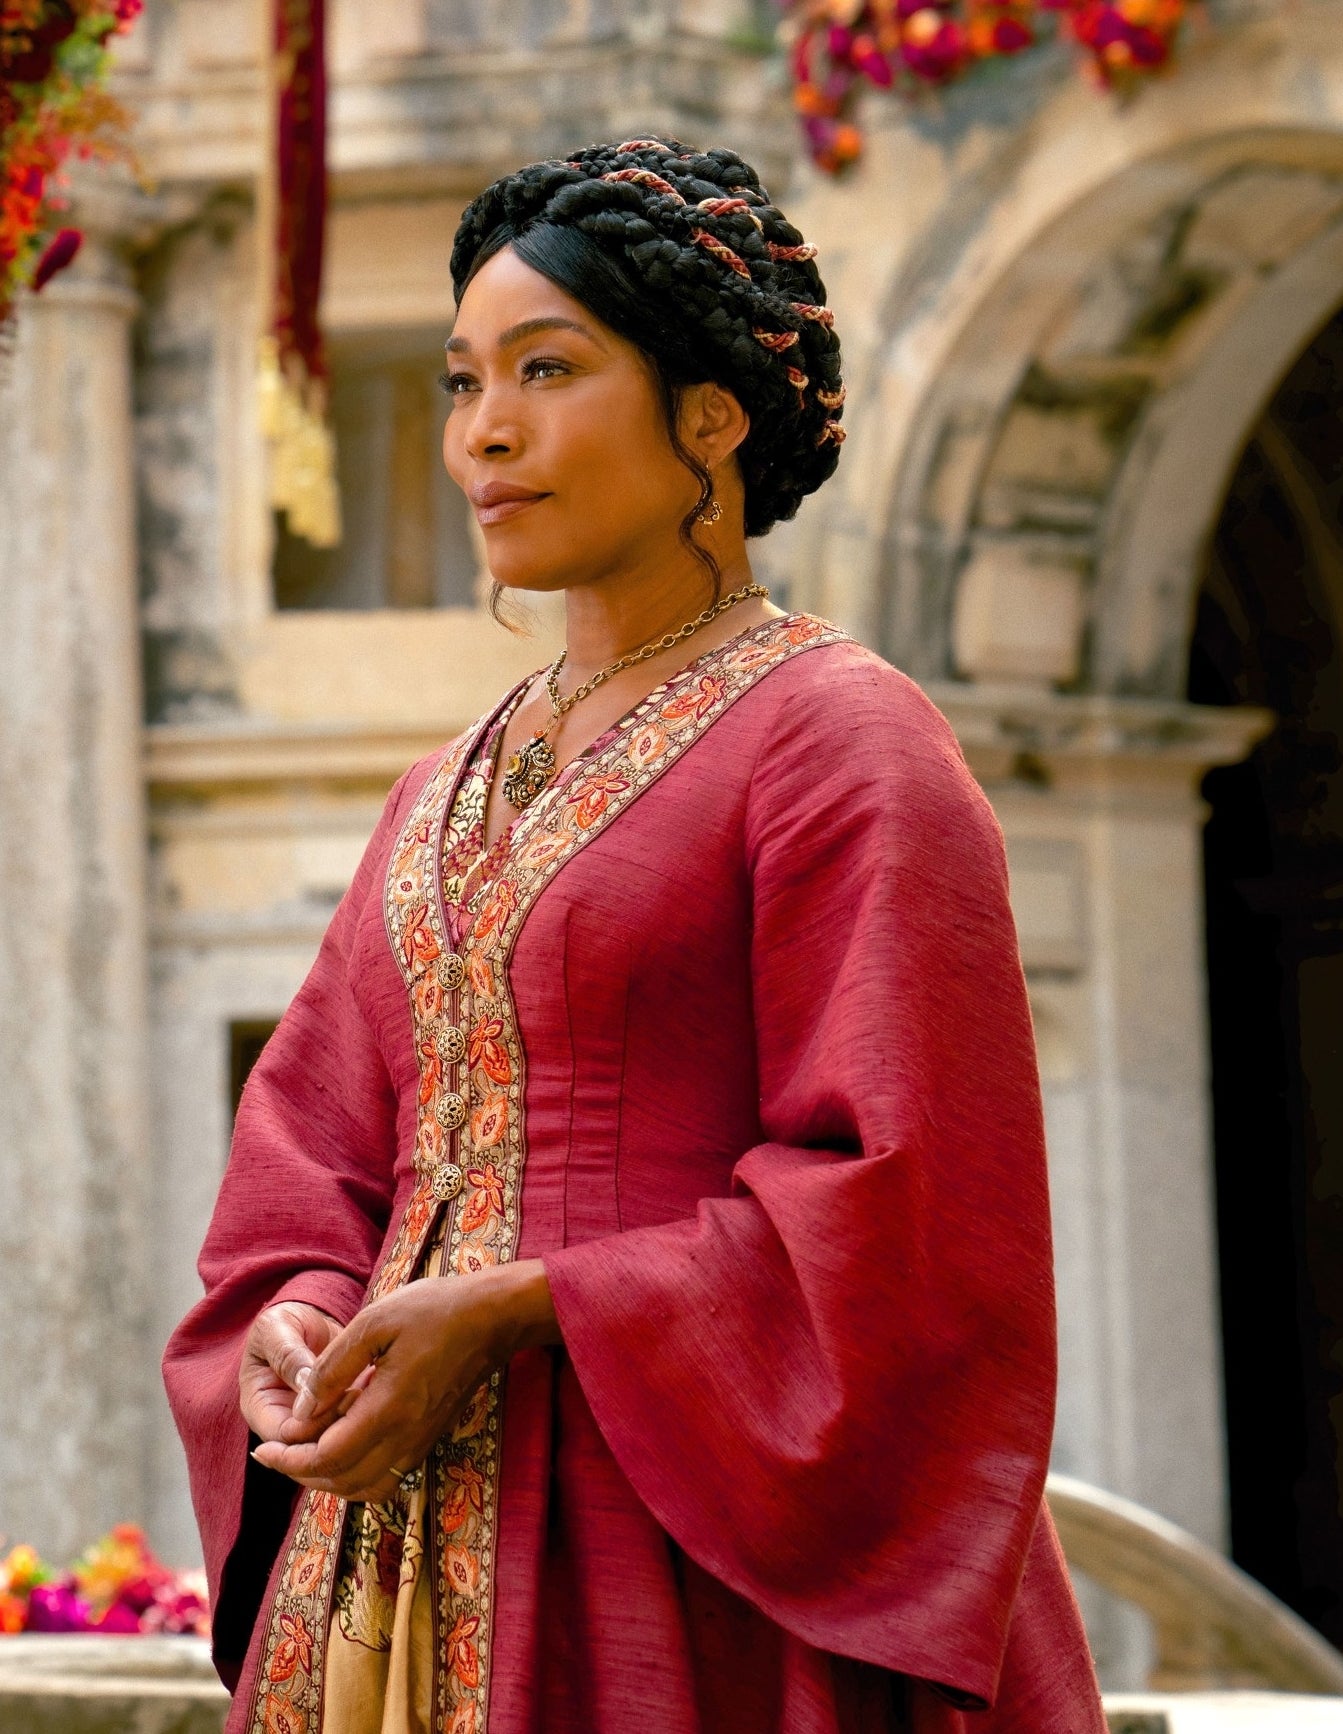 Angela Basset in medieval attire stands in a courtyard with floral arrangements in a from Damsel